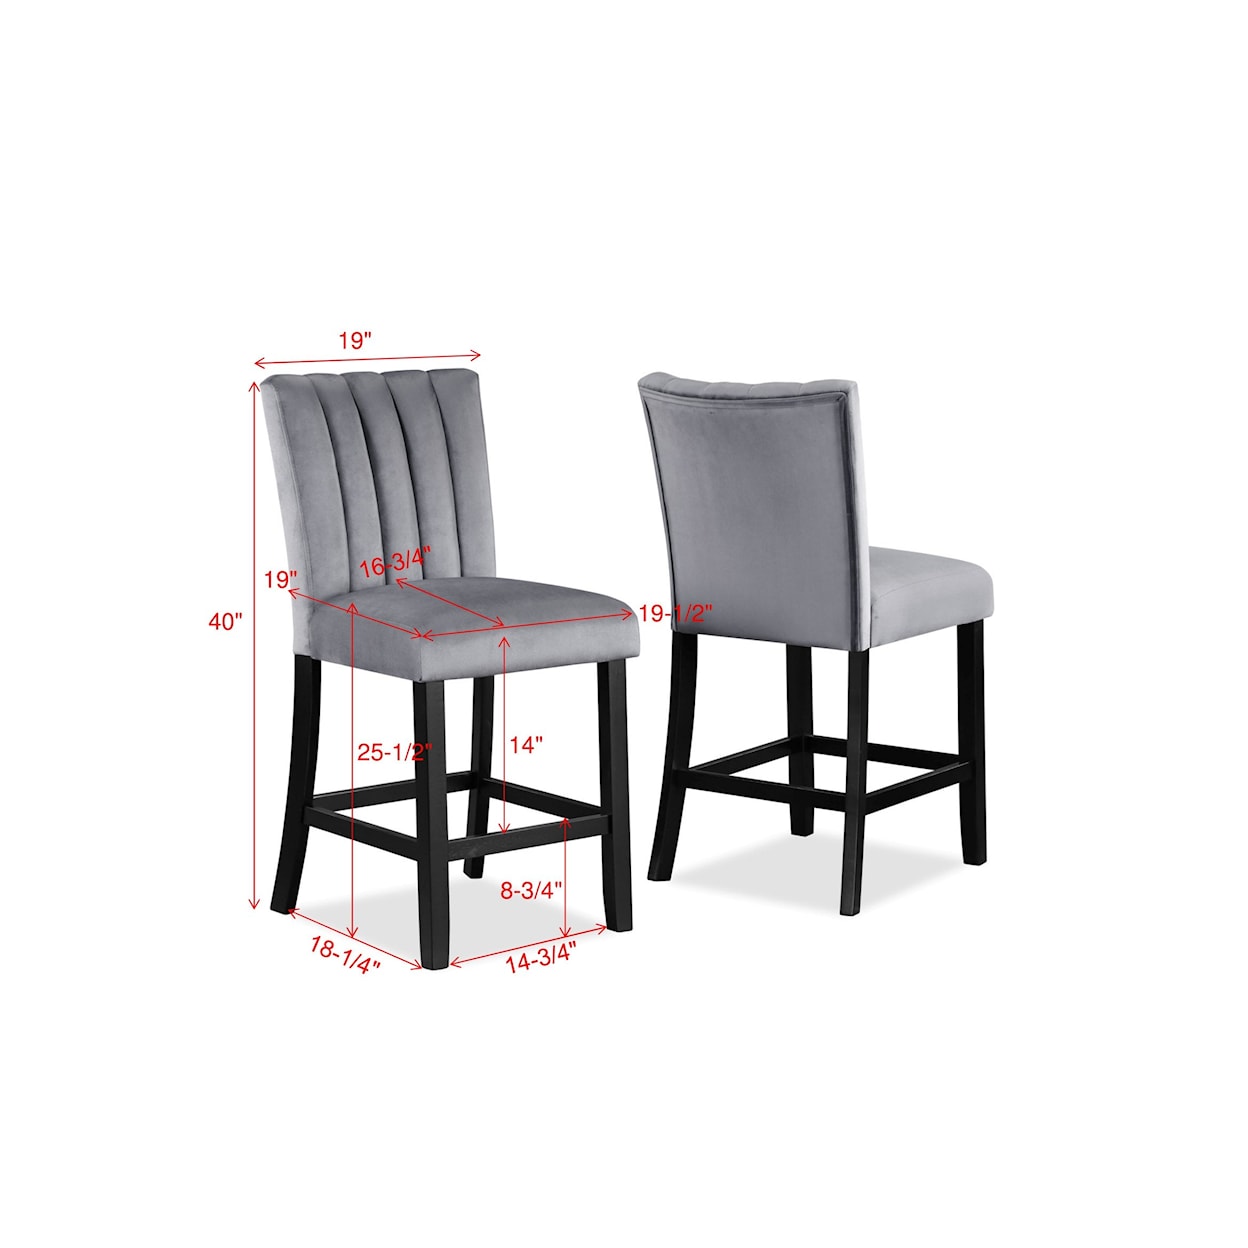 Crown Mark Pascal 5-Piece Counter Height Dining Set